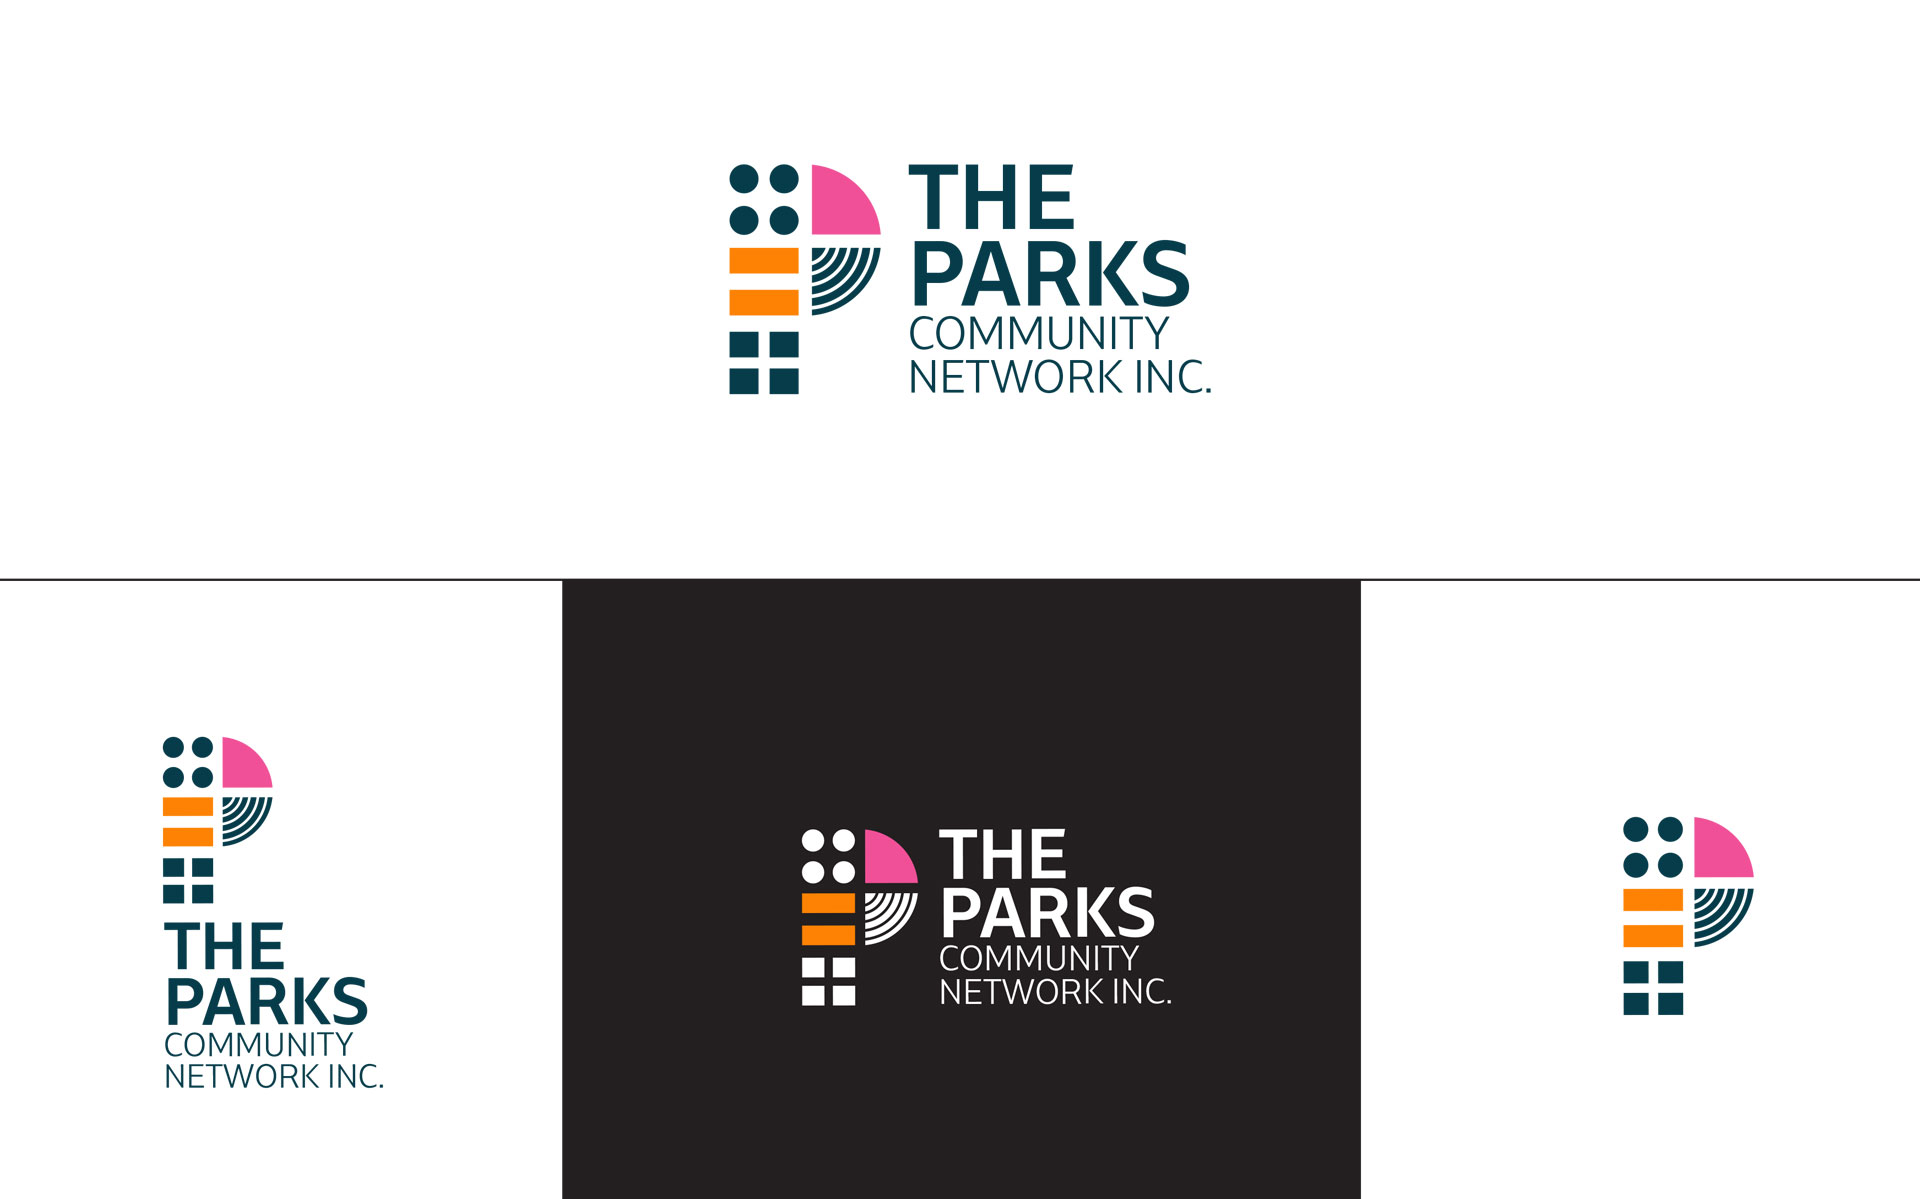 The Parks Community Network logo, branding & marketing designed by Amy at Yellow Sunday